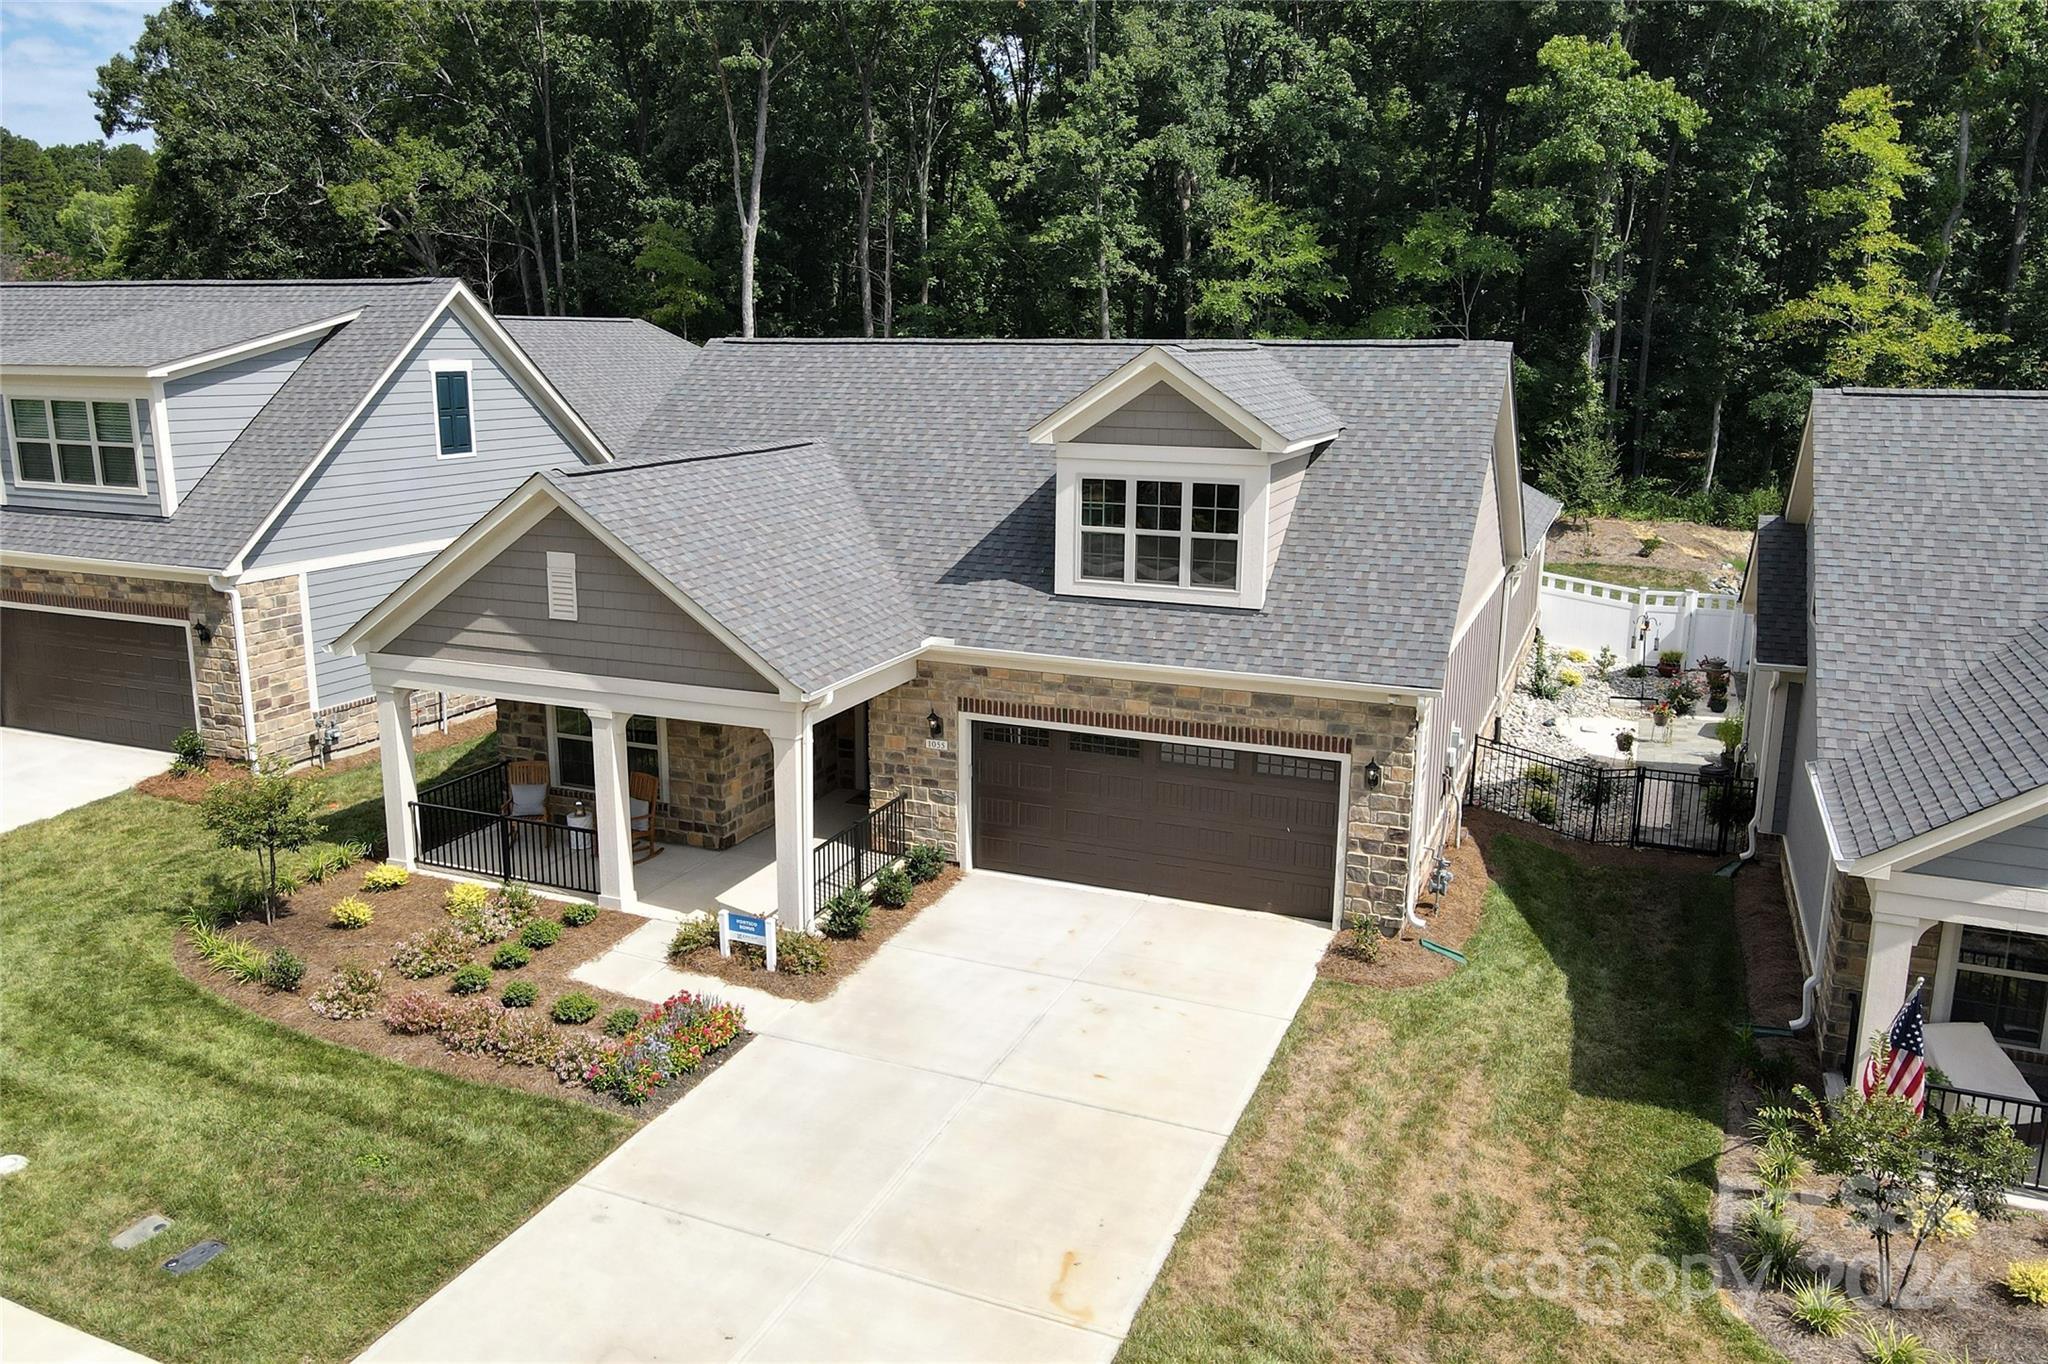 Photo one of 1055 Millview Ln Stallings NC 28104 | MLS 4113607